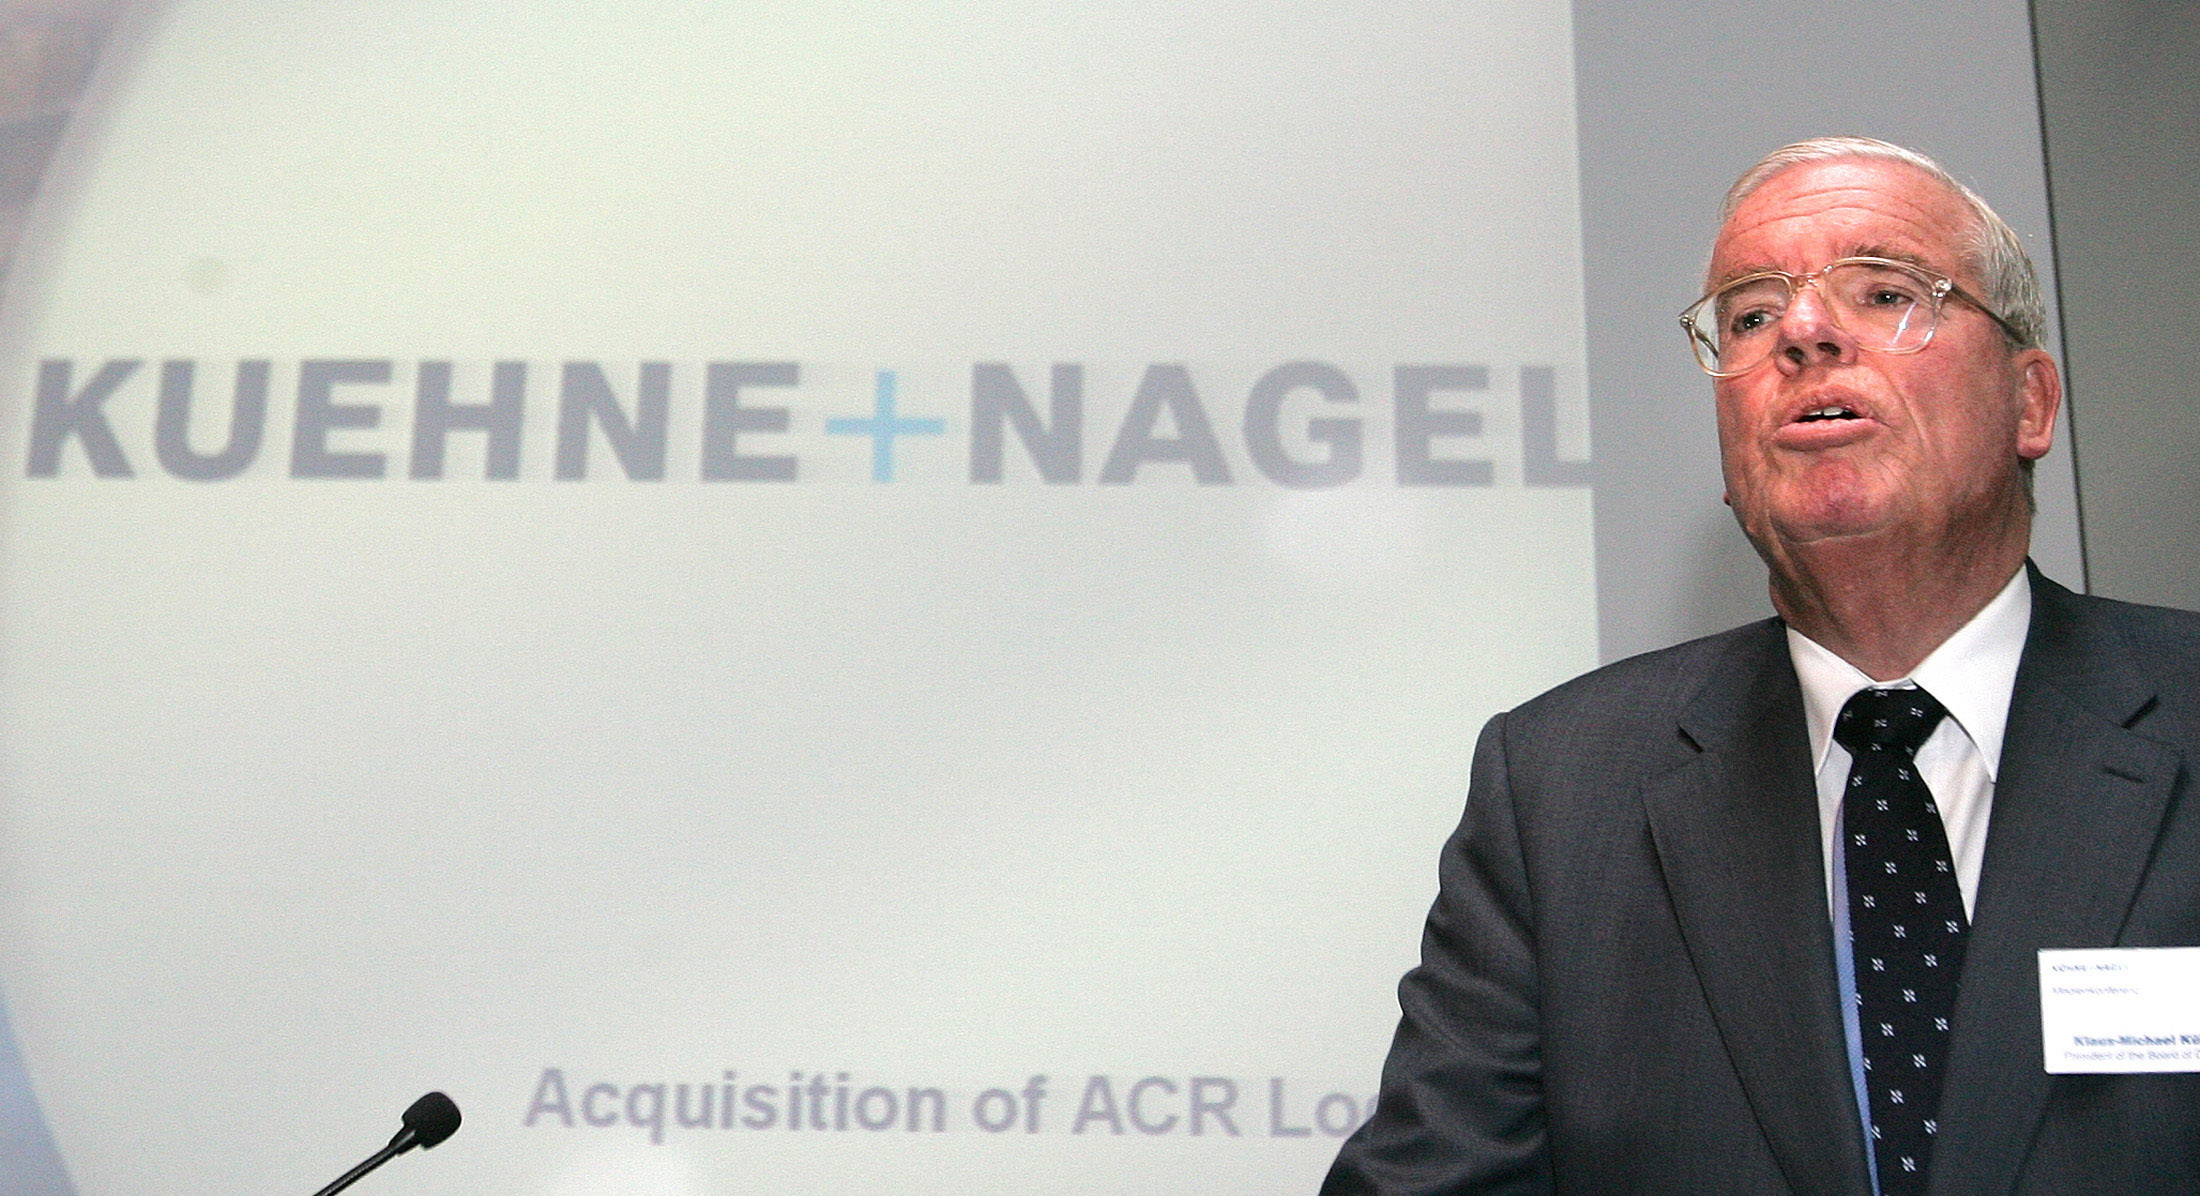 Kuehne & Nagel's president Kuehne announces the acquisition of ACR Logistics at a news conference in Zurich